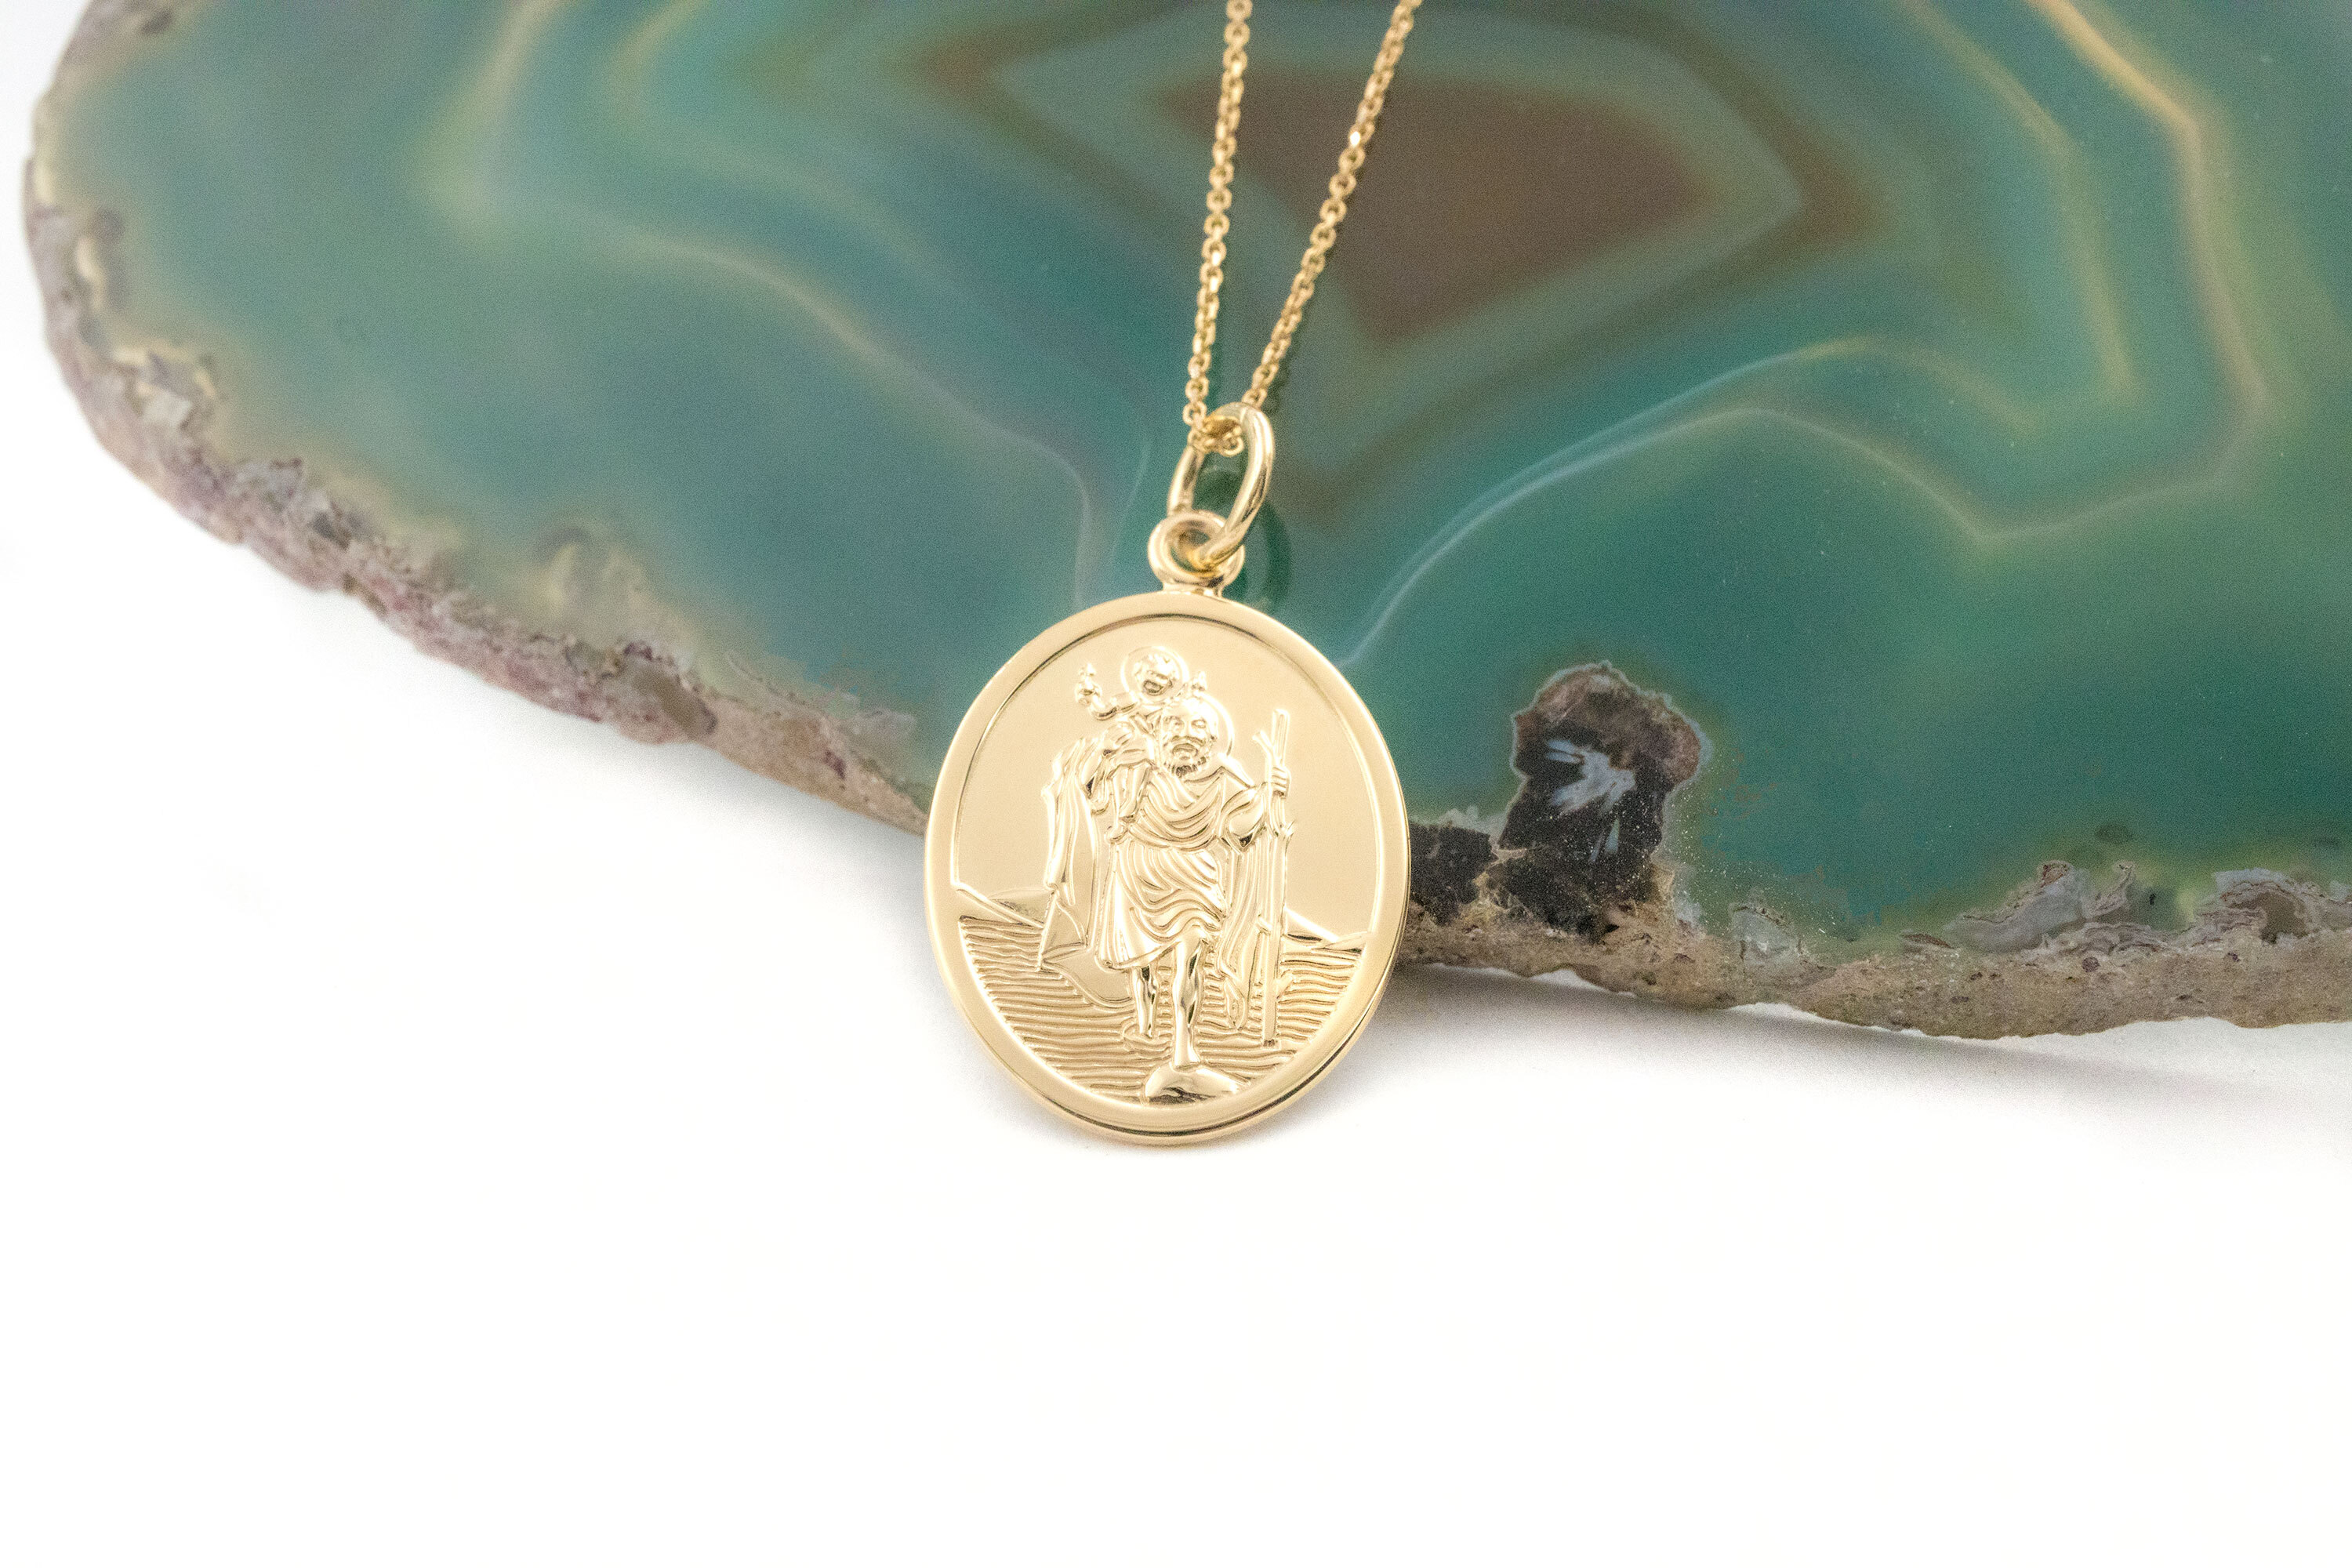 Saint Christopher Medallion Necklace in 14K Yellow Gold - Sam's Club